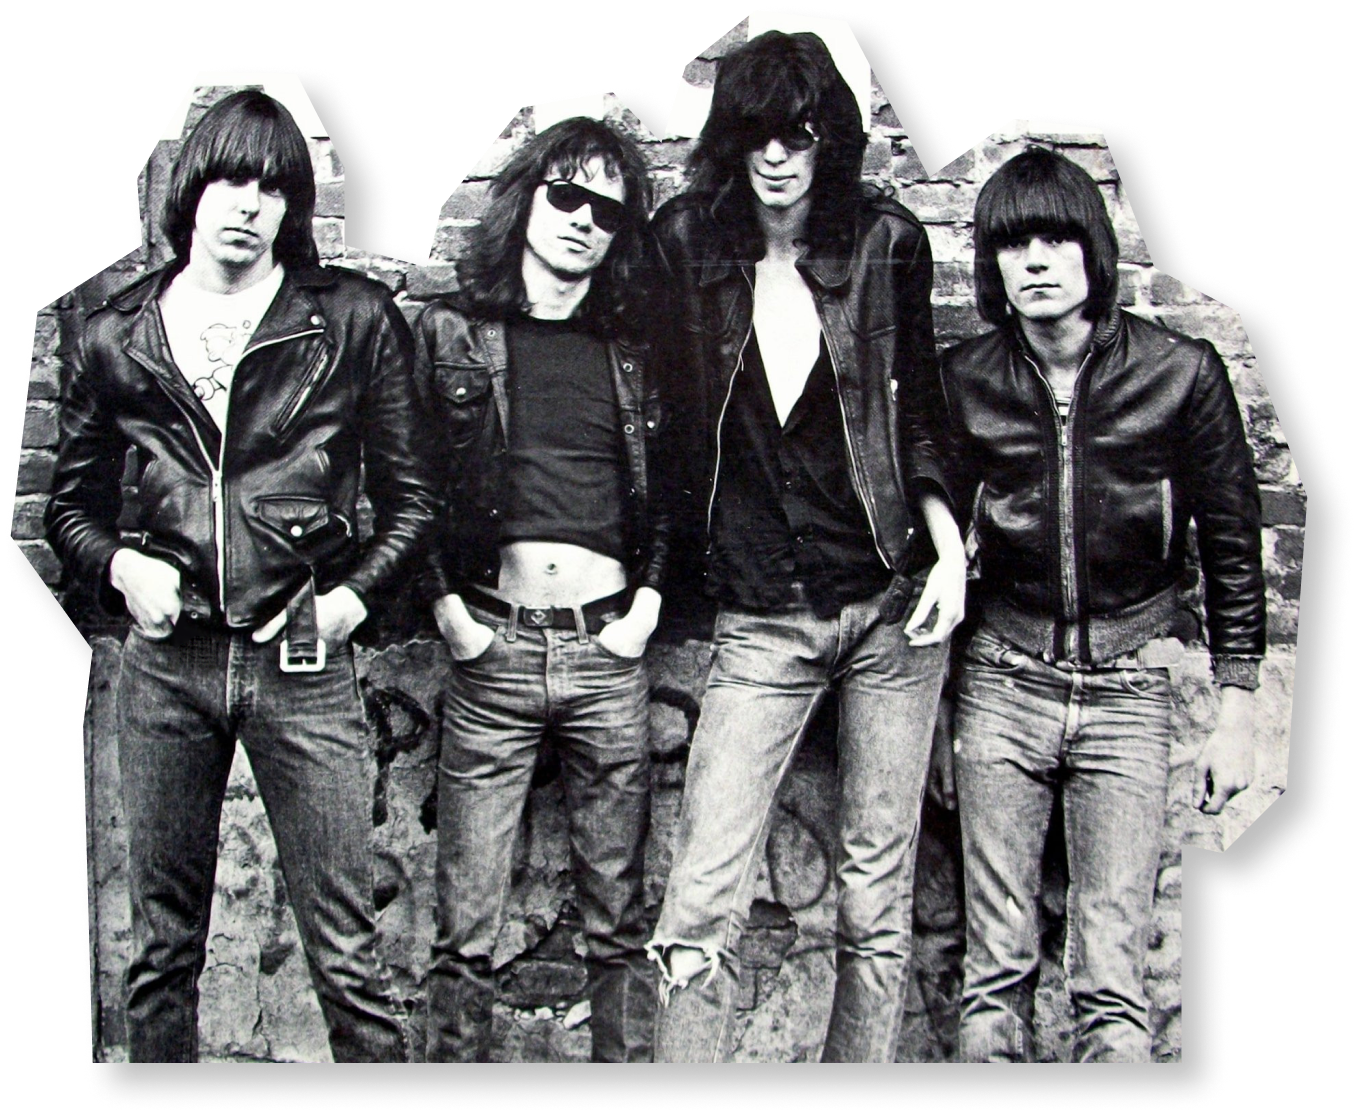 A black-and-white image of The Ramones.